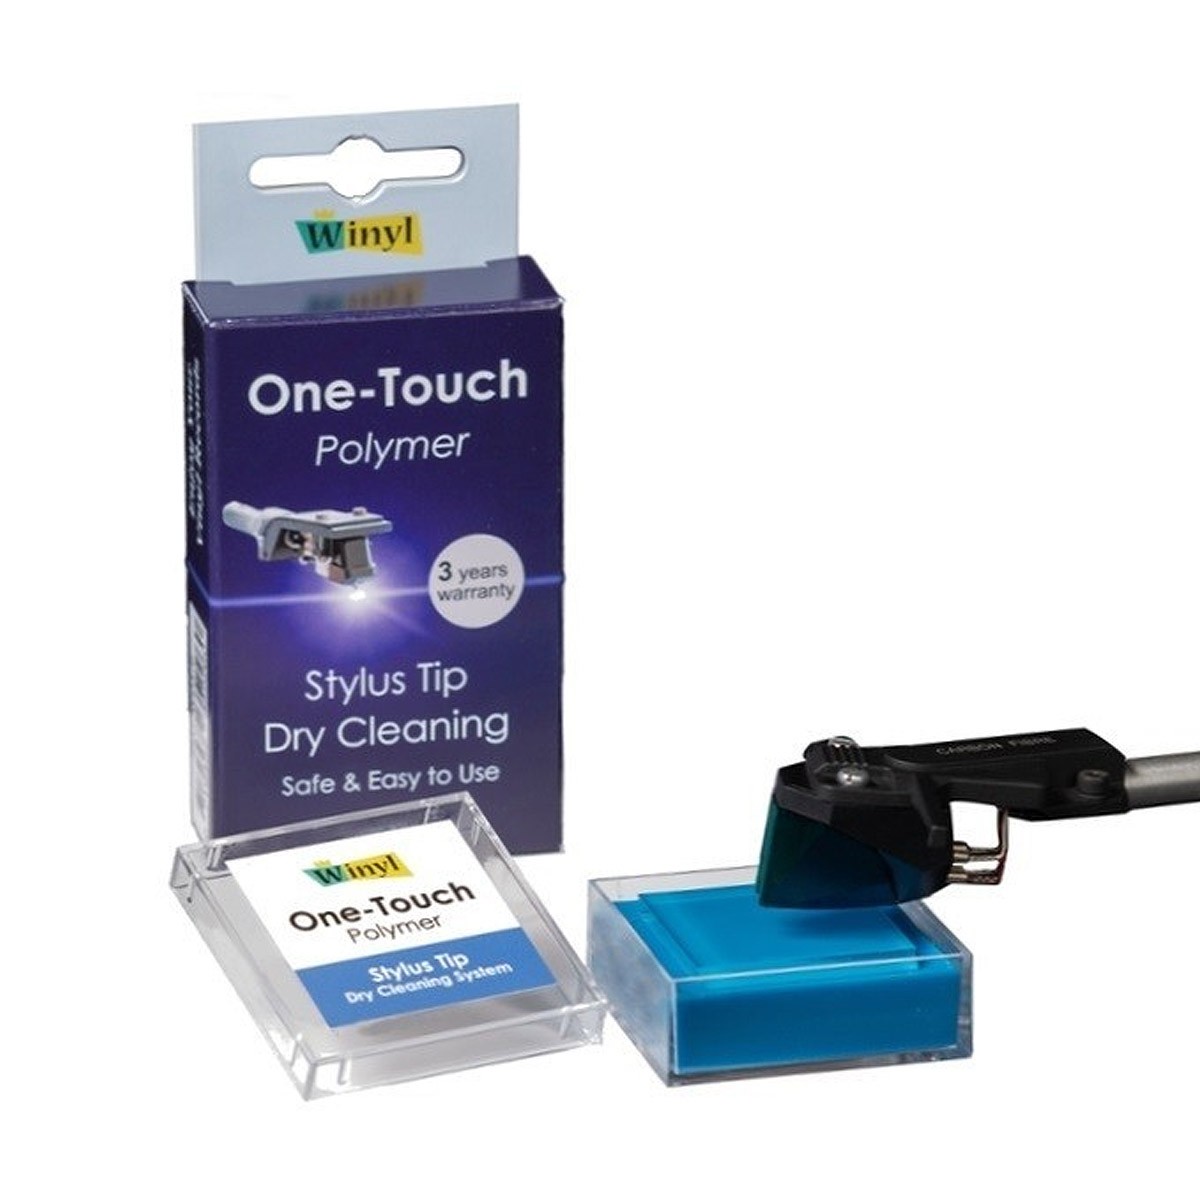 WINYL ONE-TOUCH POLYMER Nettoyant Solide Polymère pour Diamant Platine Vinyle